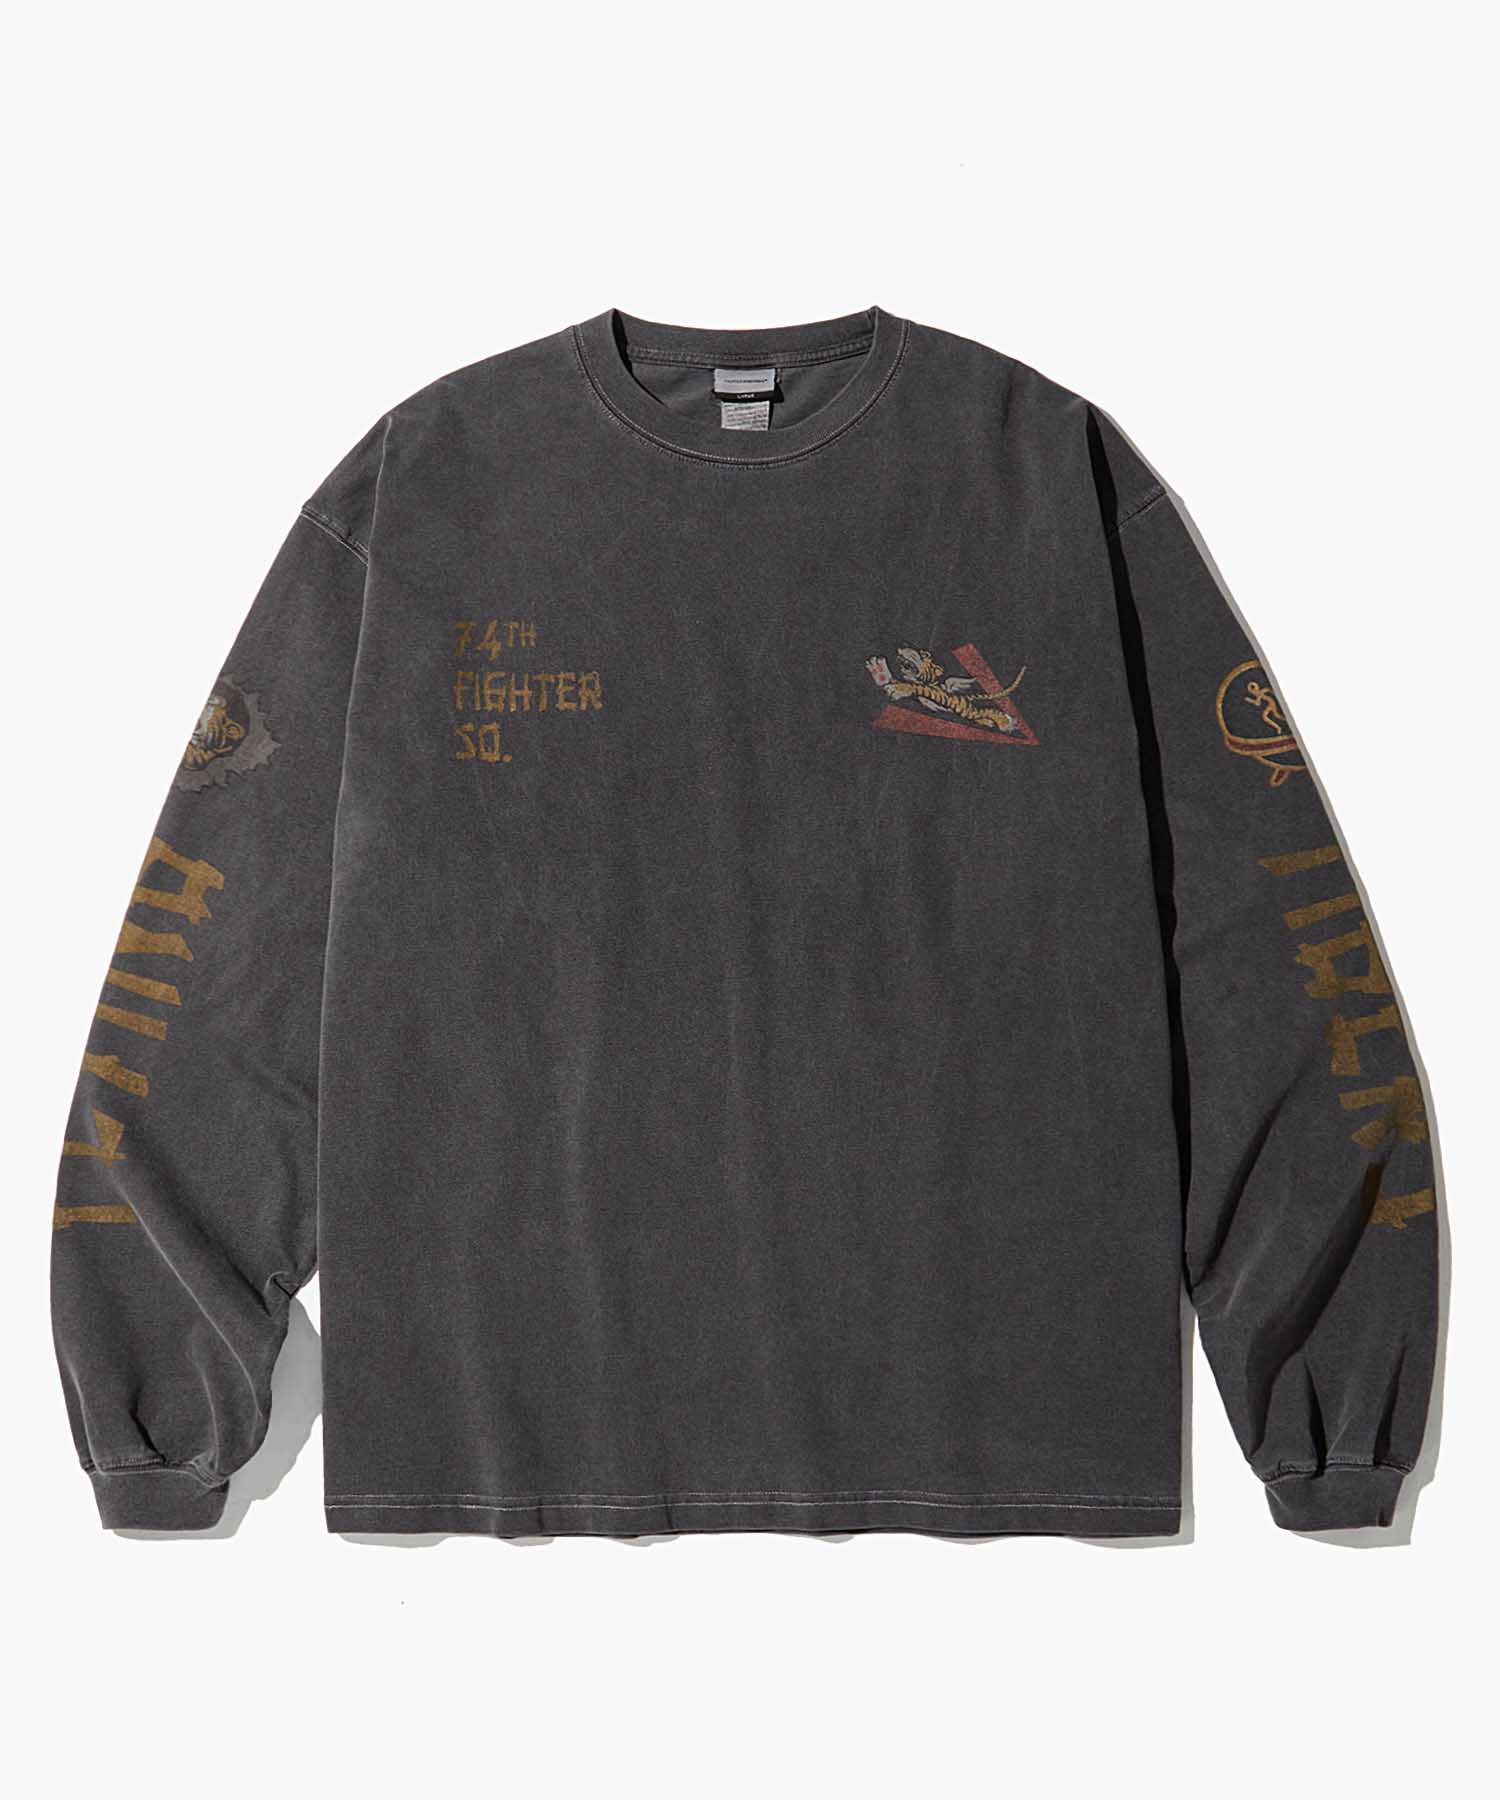 MIL SERIES LONG SLEEVE(74TH FIGHTER SQ)_PIGMENT CHARCOAL